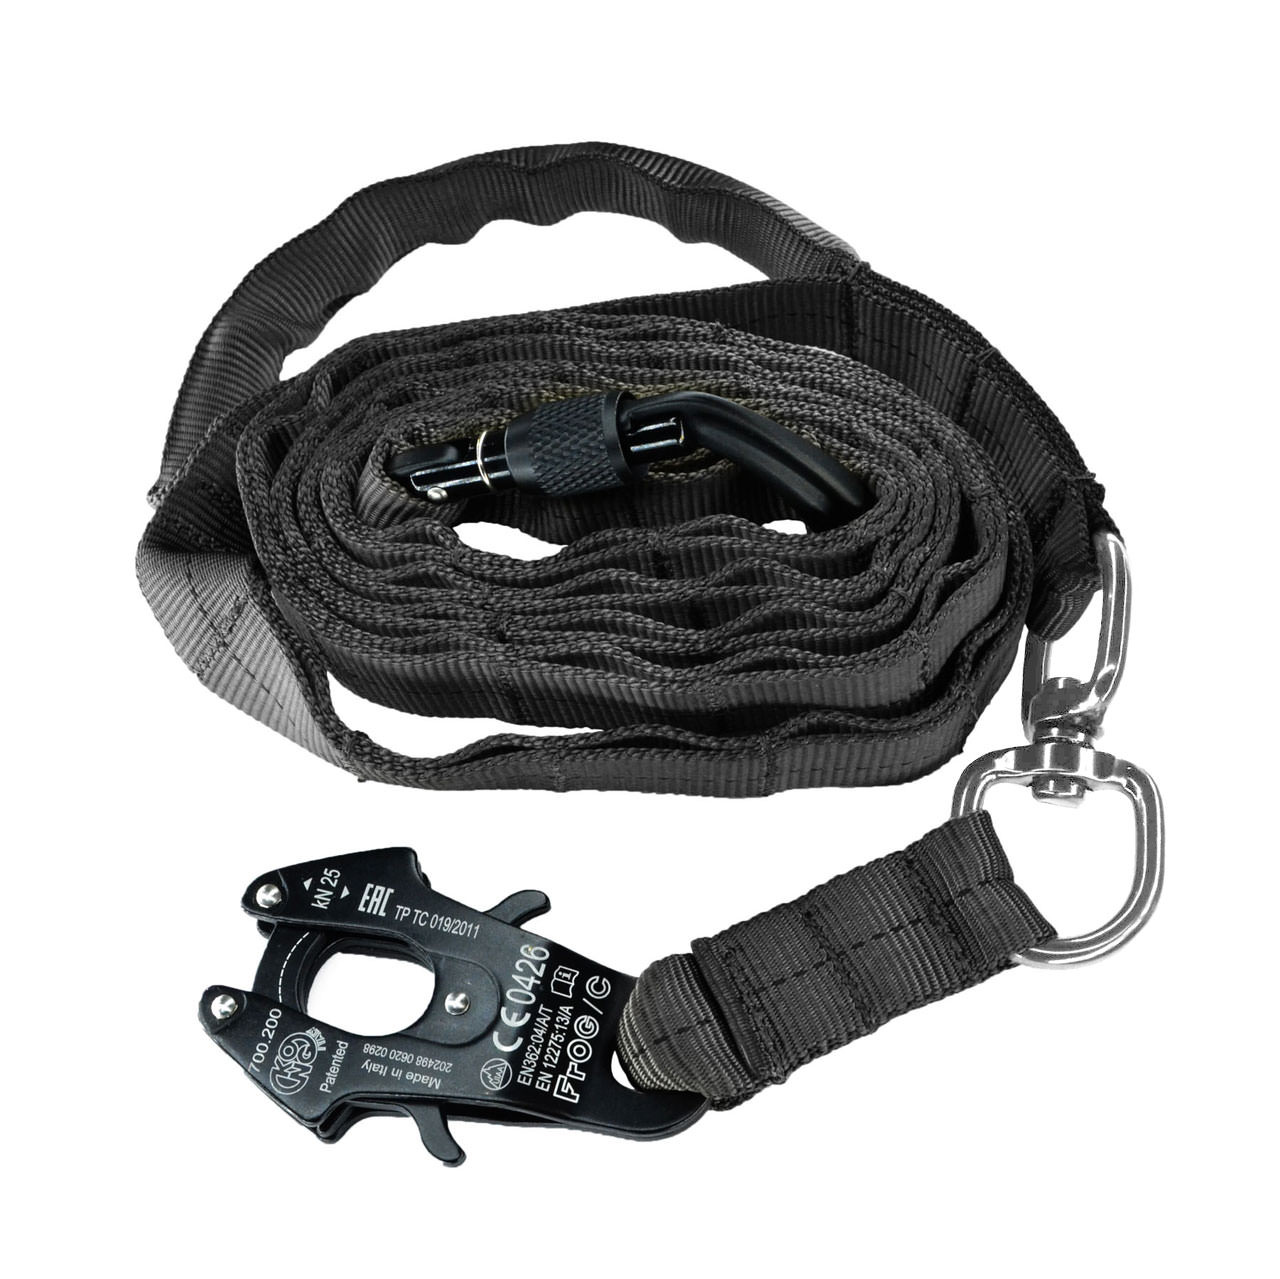 Nylon Adjustable Service Dog Leash with Frog Clip - Ray Allen Manufacturing